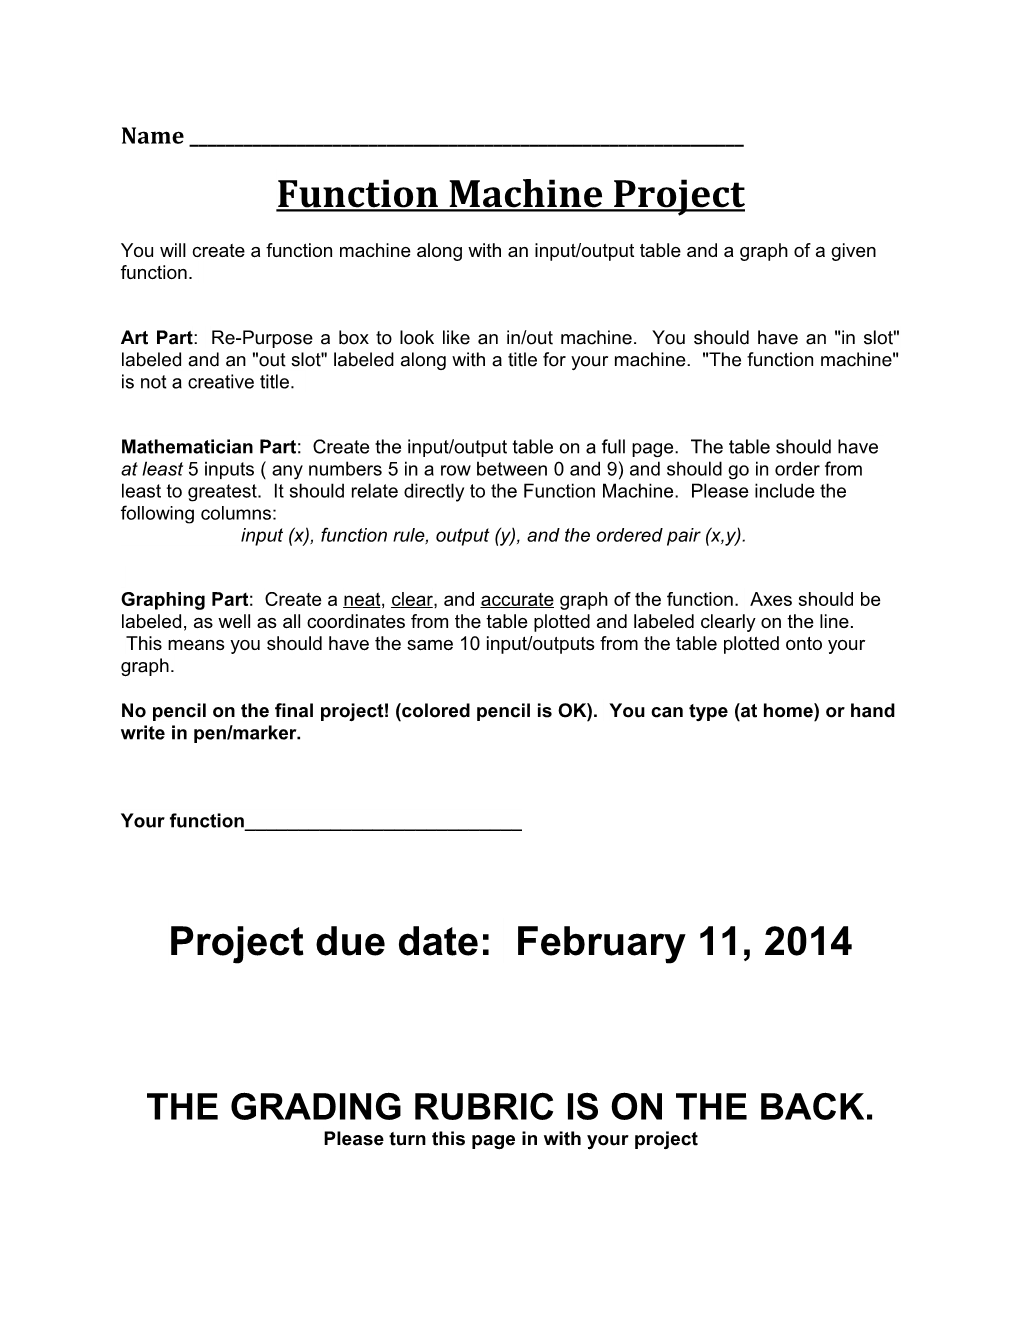 Function Machine Project